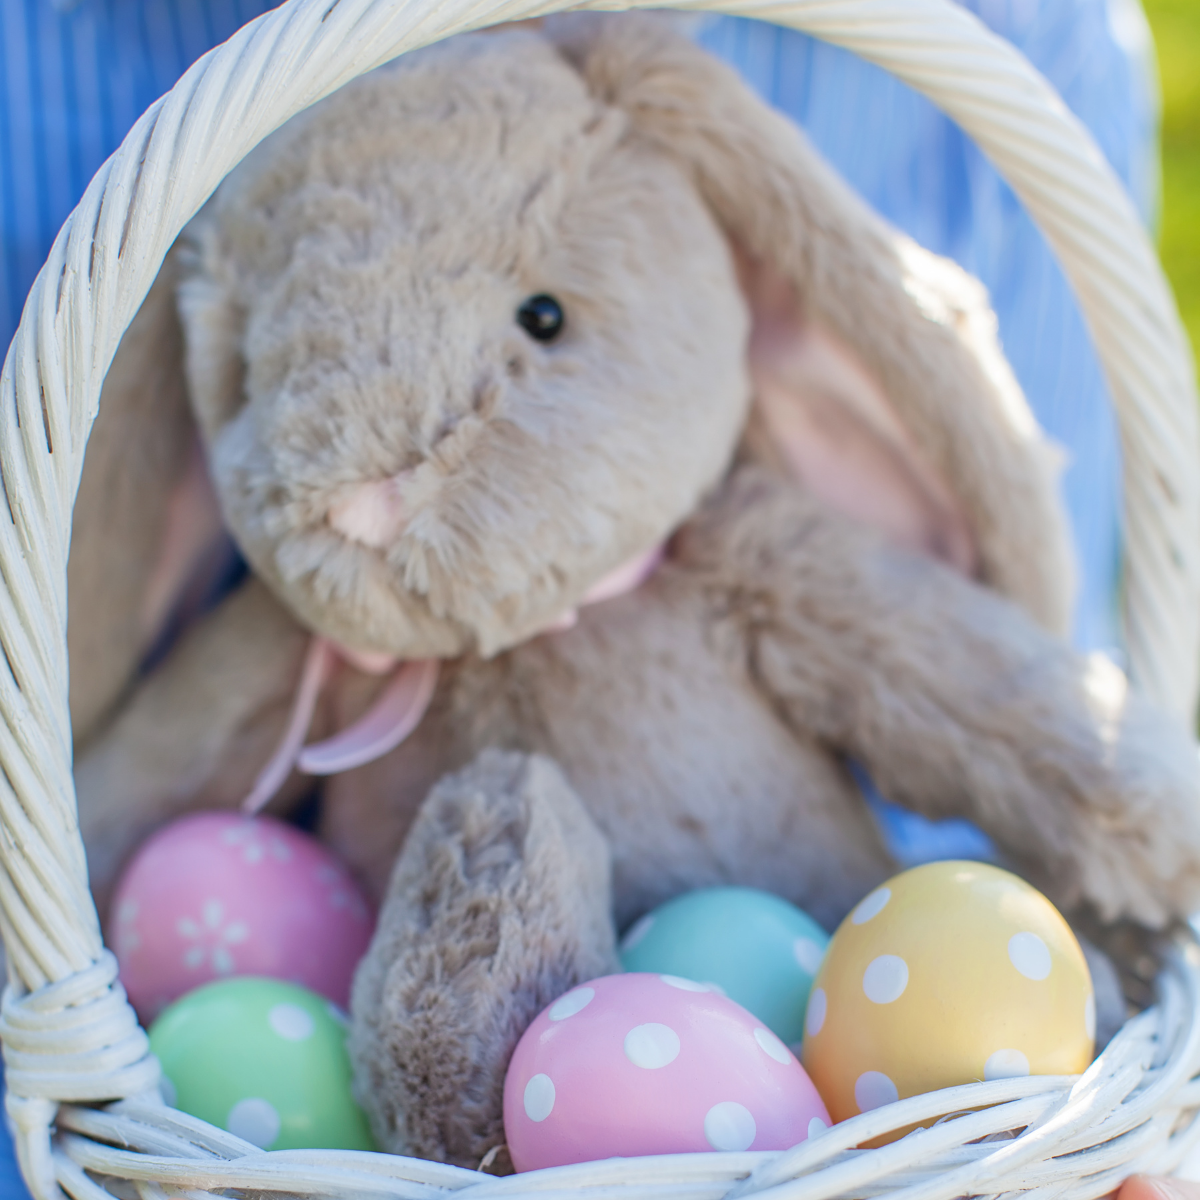 A white basket filled with Easter eggs and an plush bunny toy.